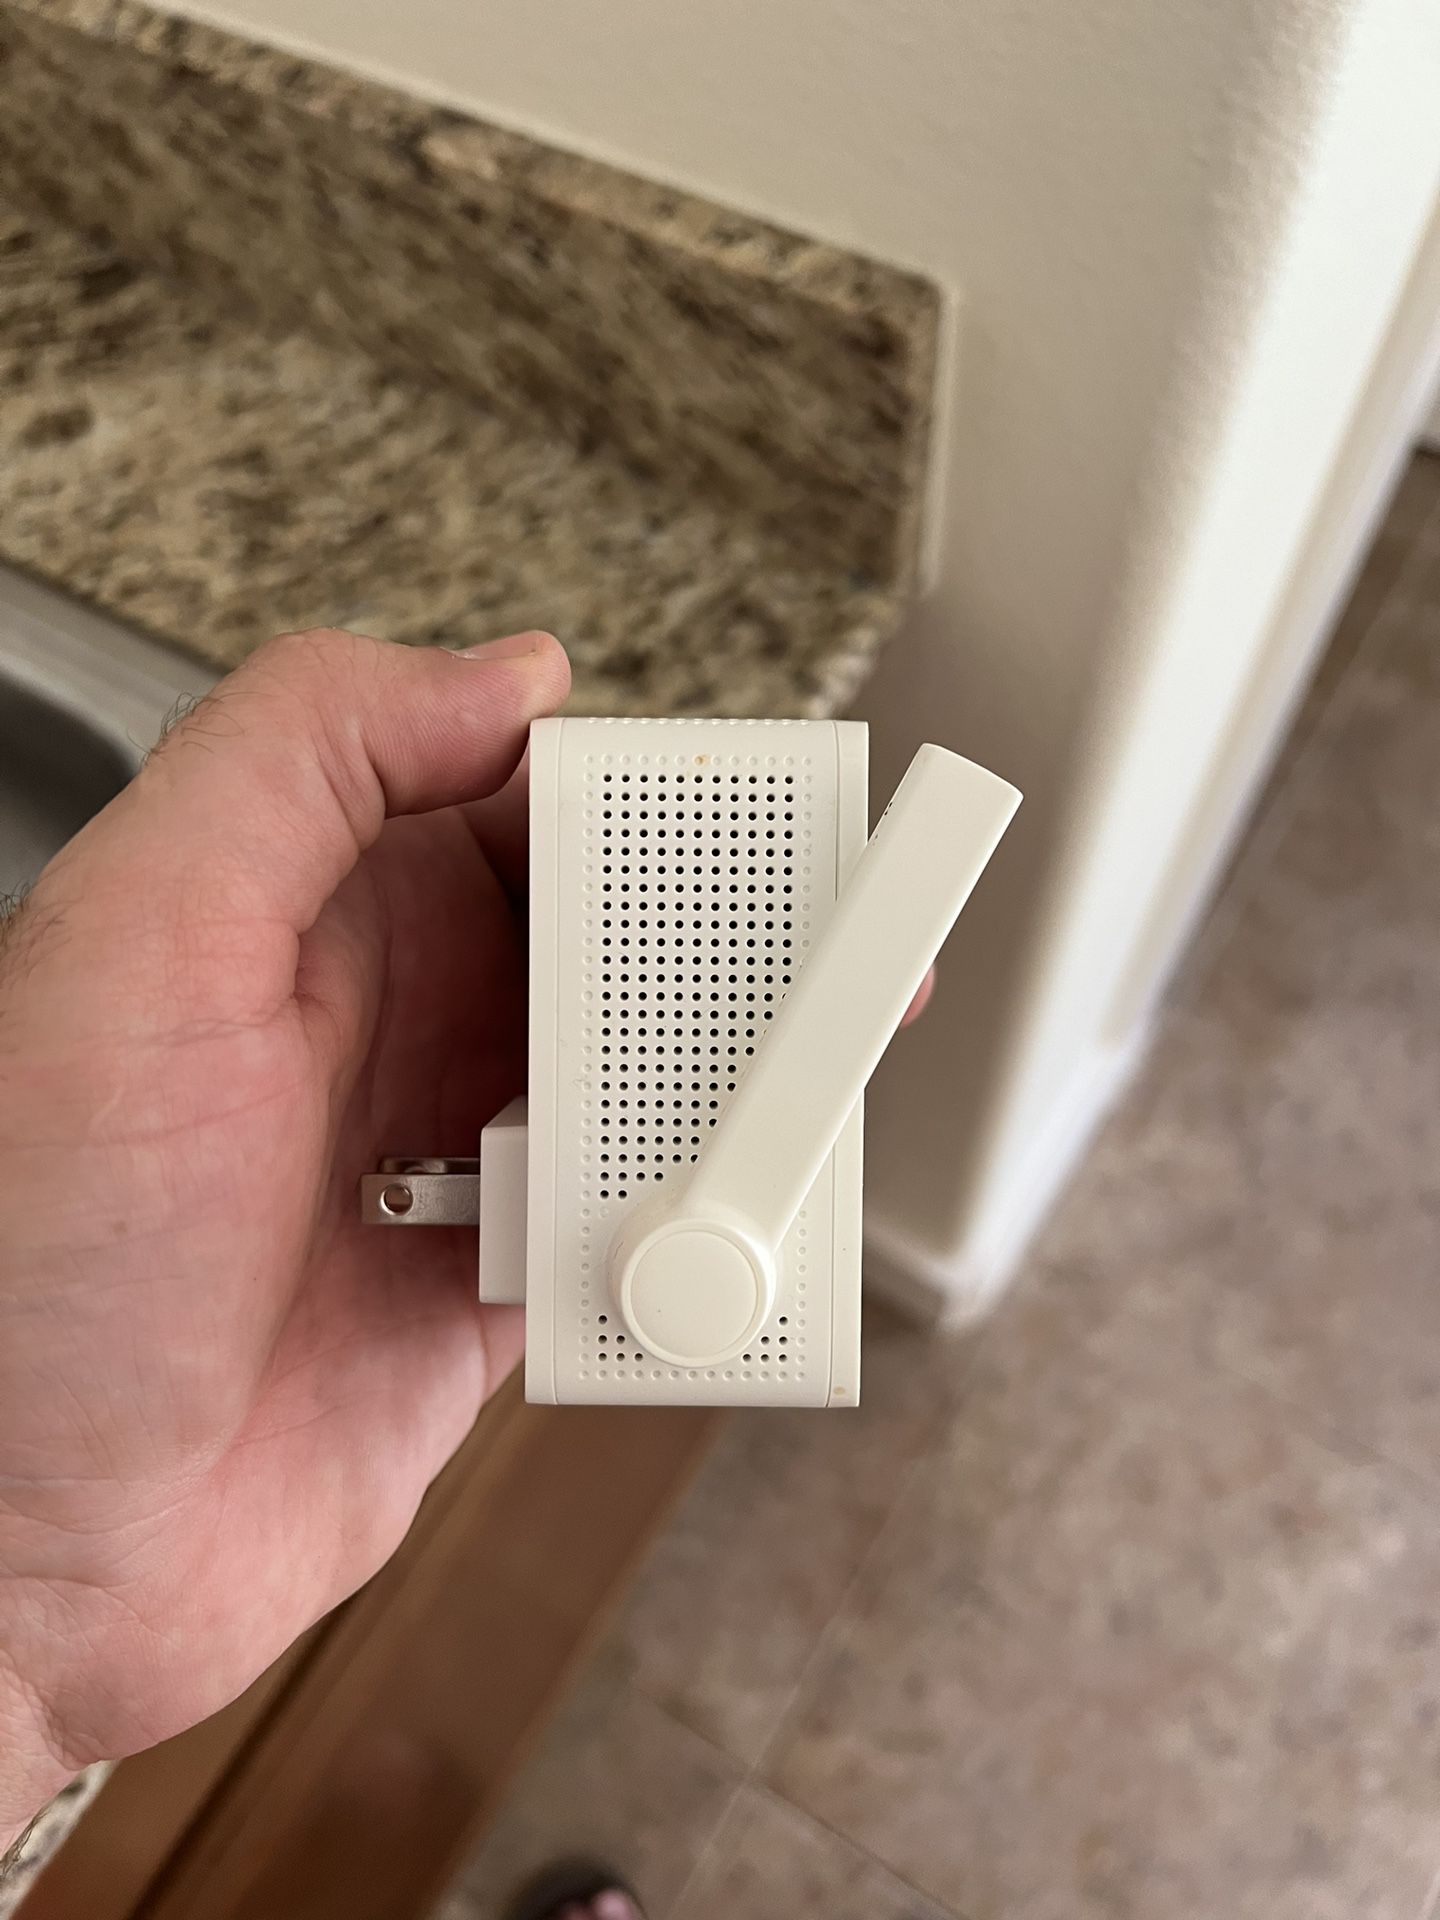 TpLink WiFi Router And Modem